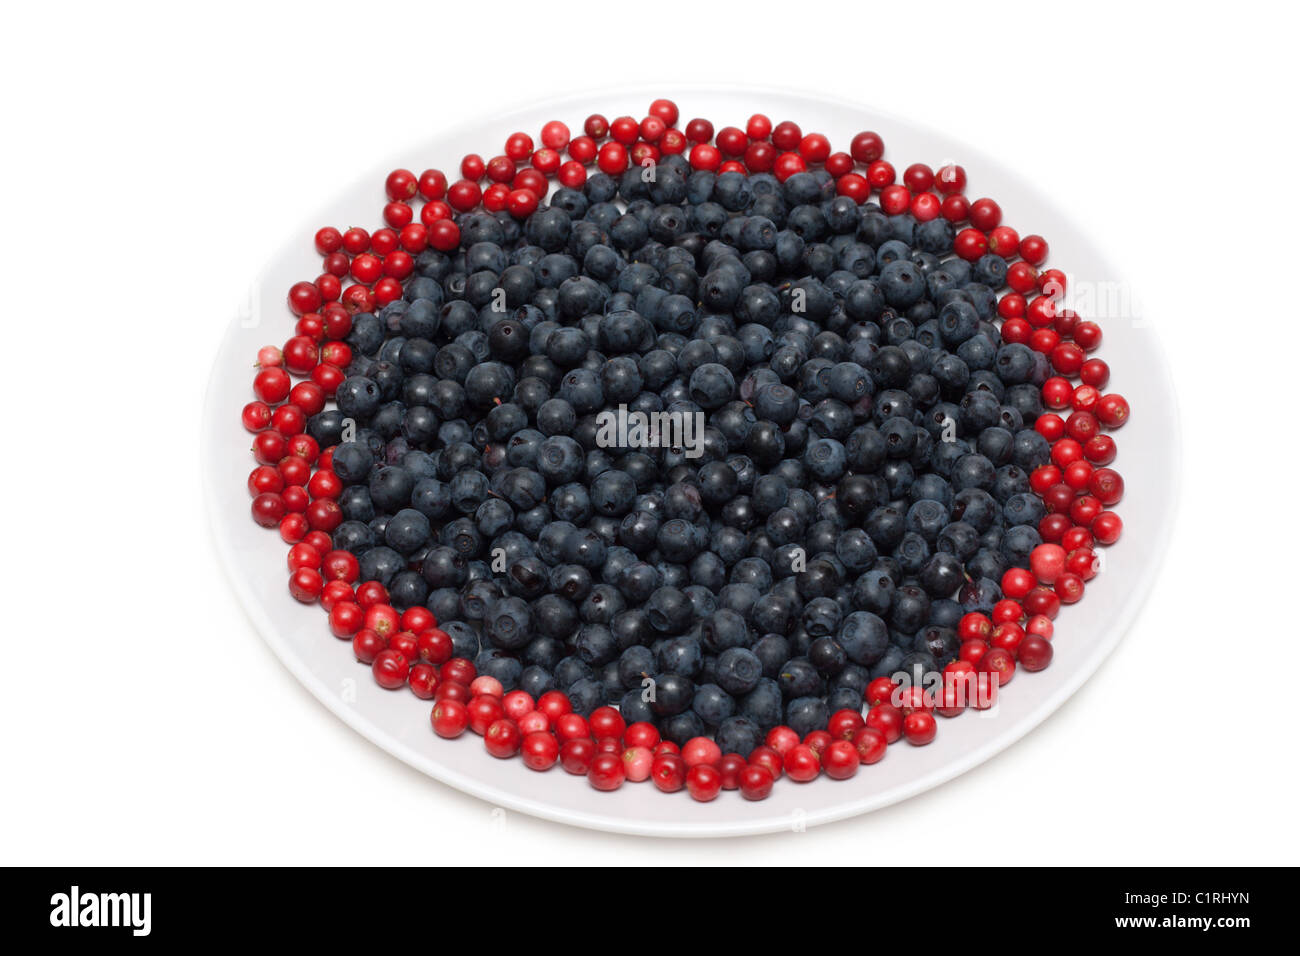 Berries of the whortleberry and cowberries on plate Stock Photo